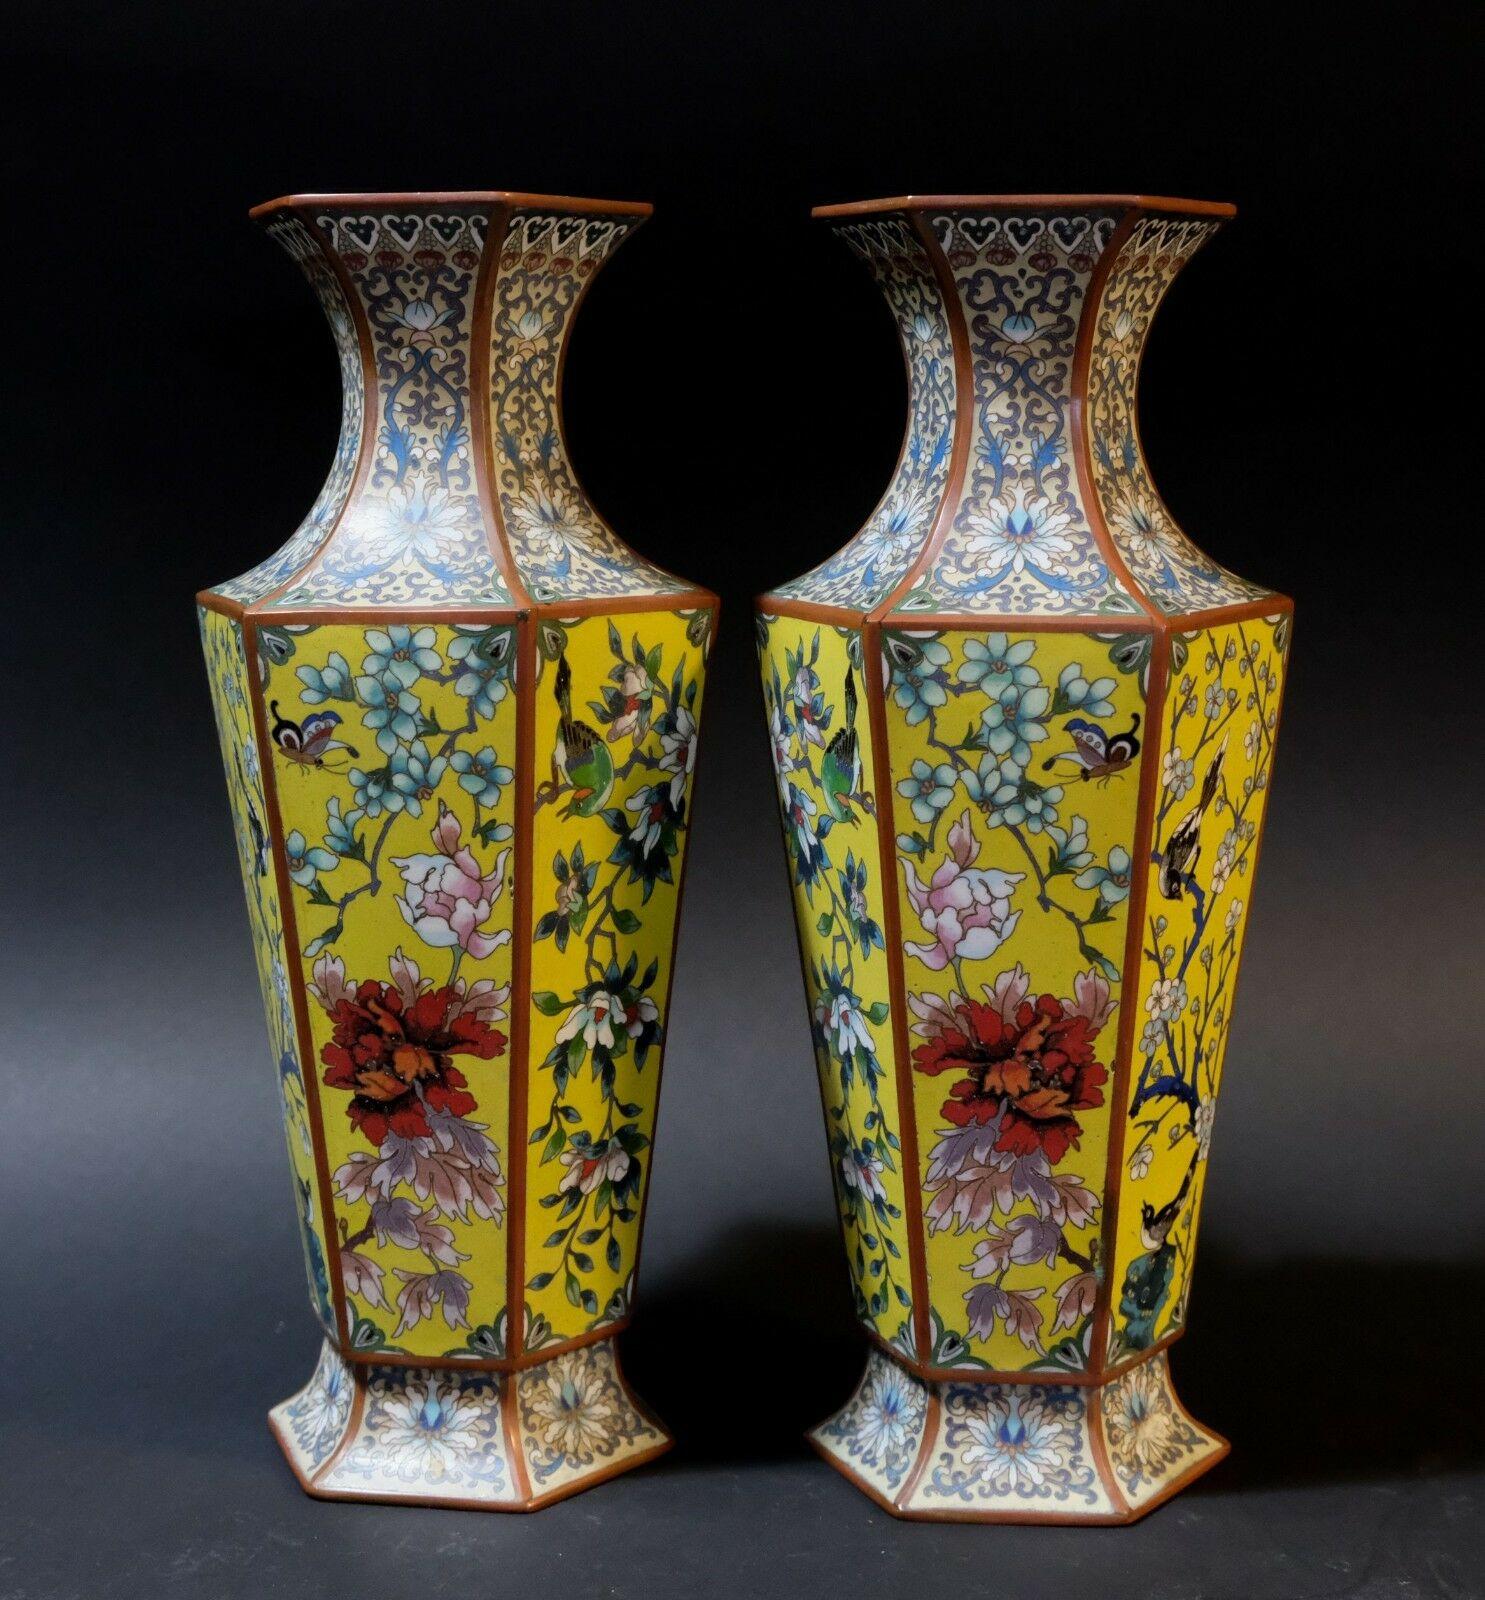 Matching Pair of Pair of French Victorian Cloisonné Vases, 19th Century For Sale 1